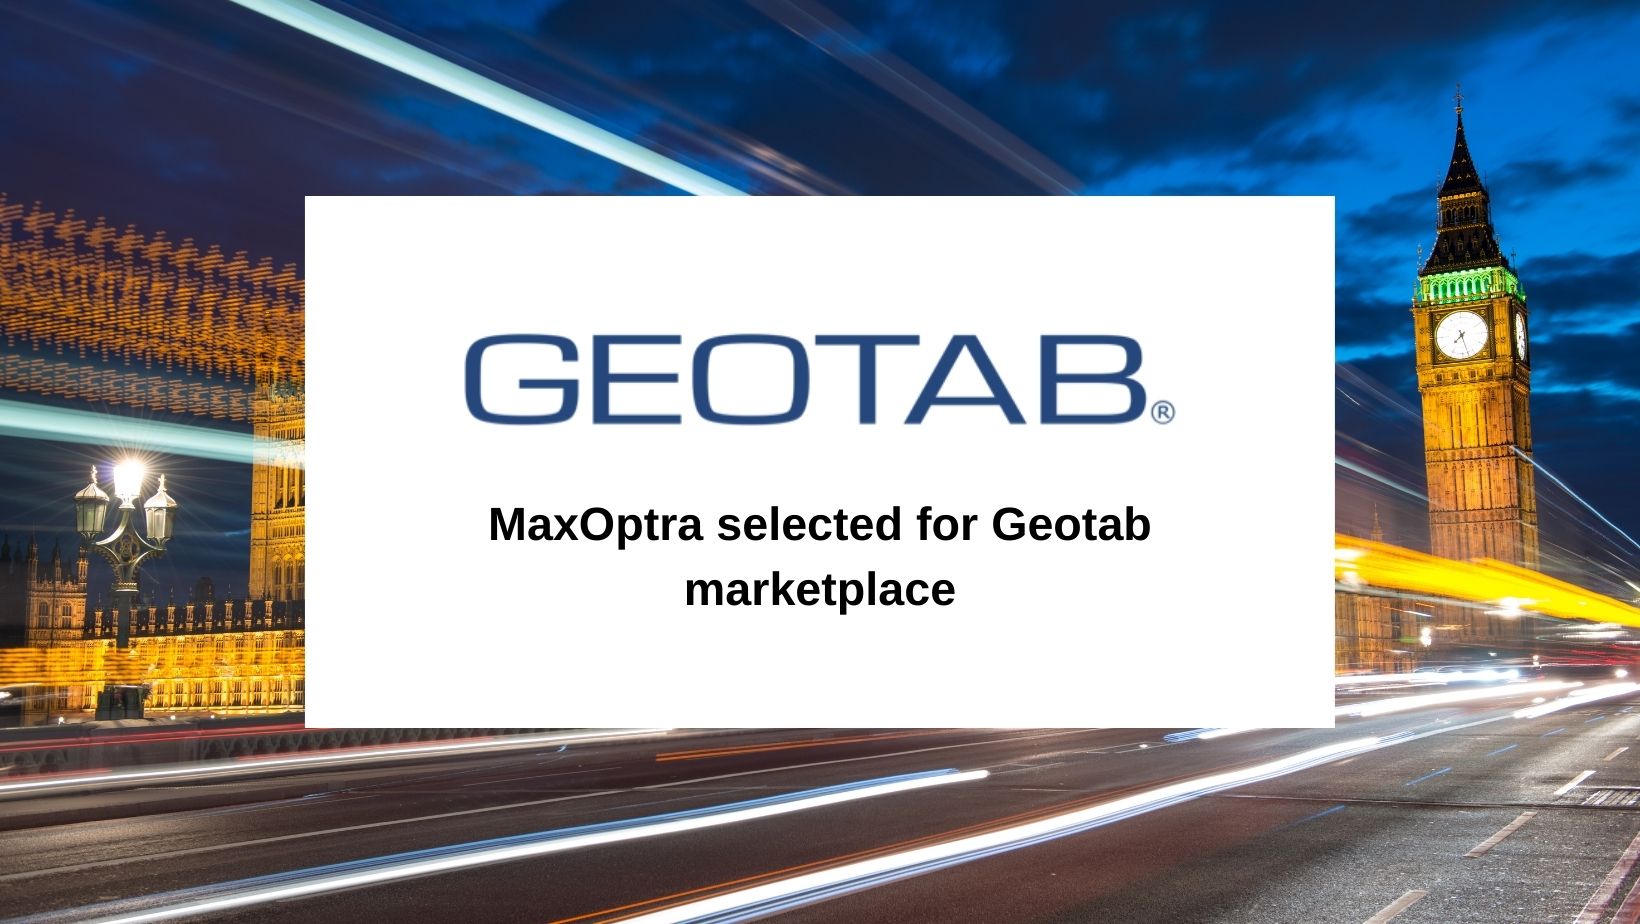  MaxOptra selected for Geotab marketplace 